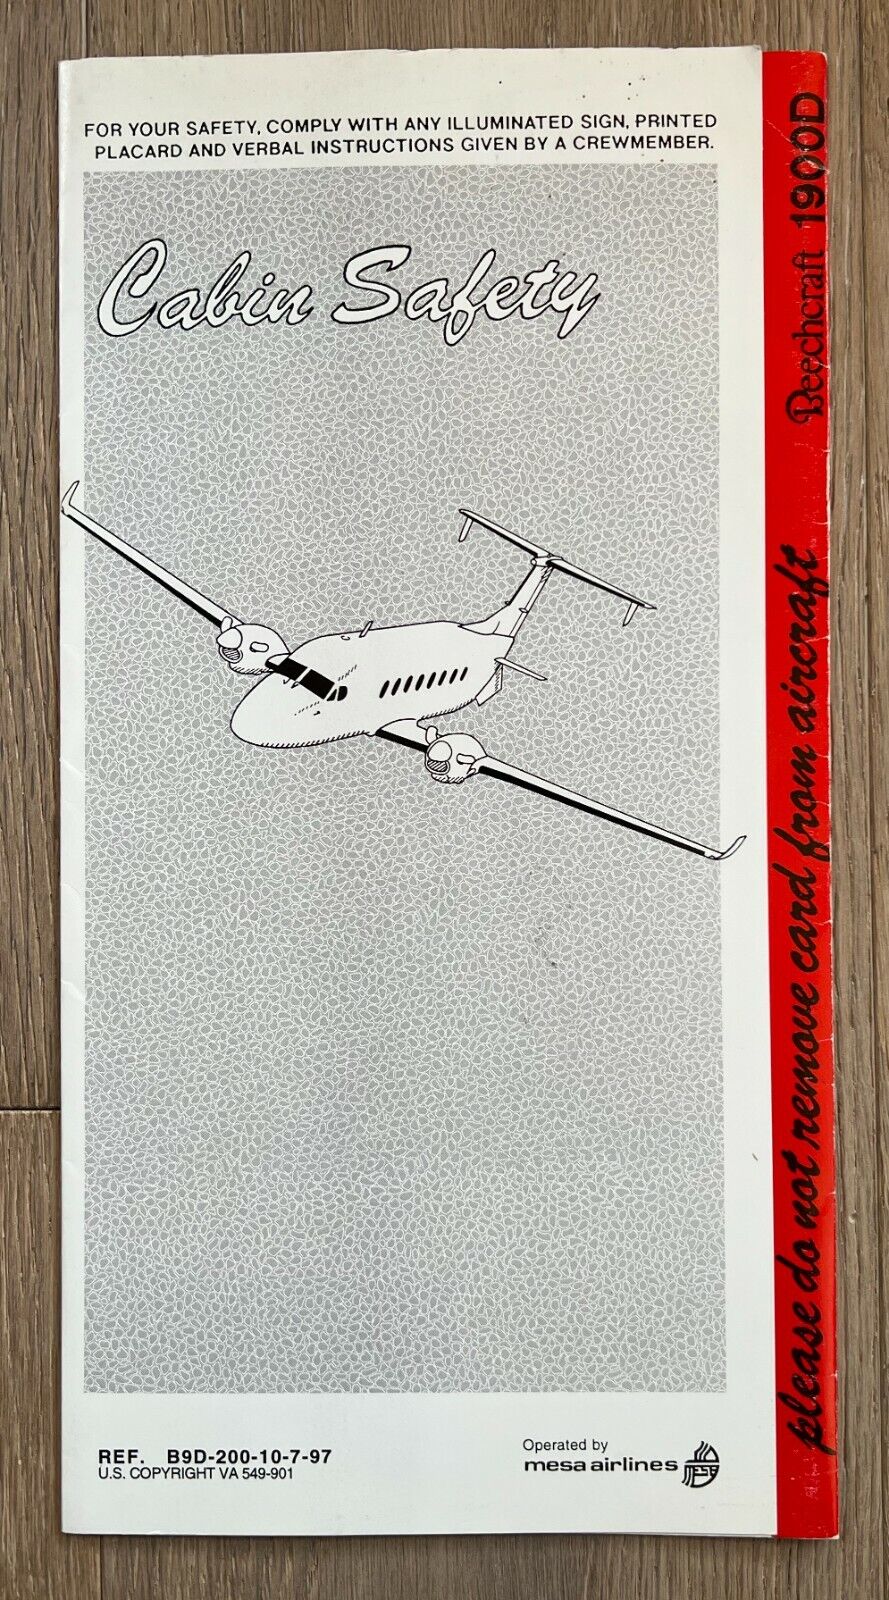 MESA AIRLINES BEECHCRAFT 1900D SAFETY CARD 1997